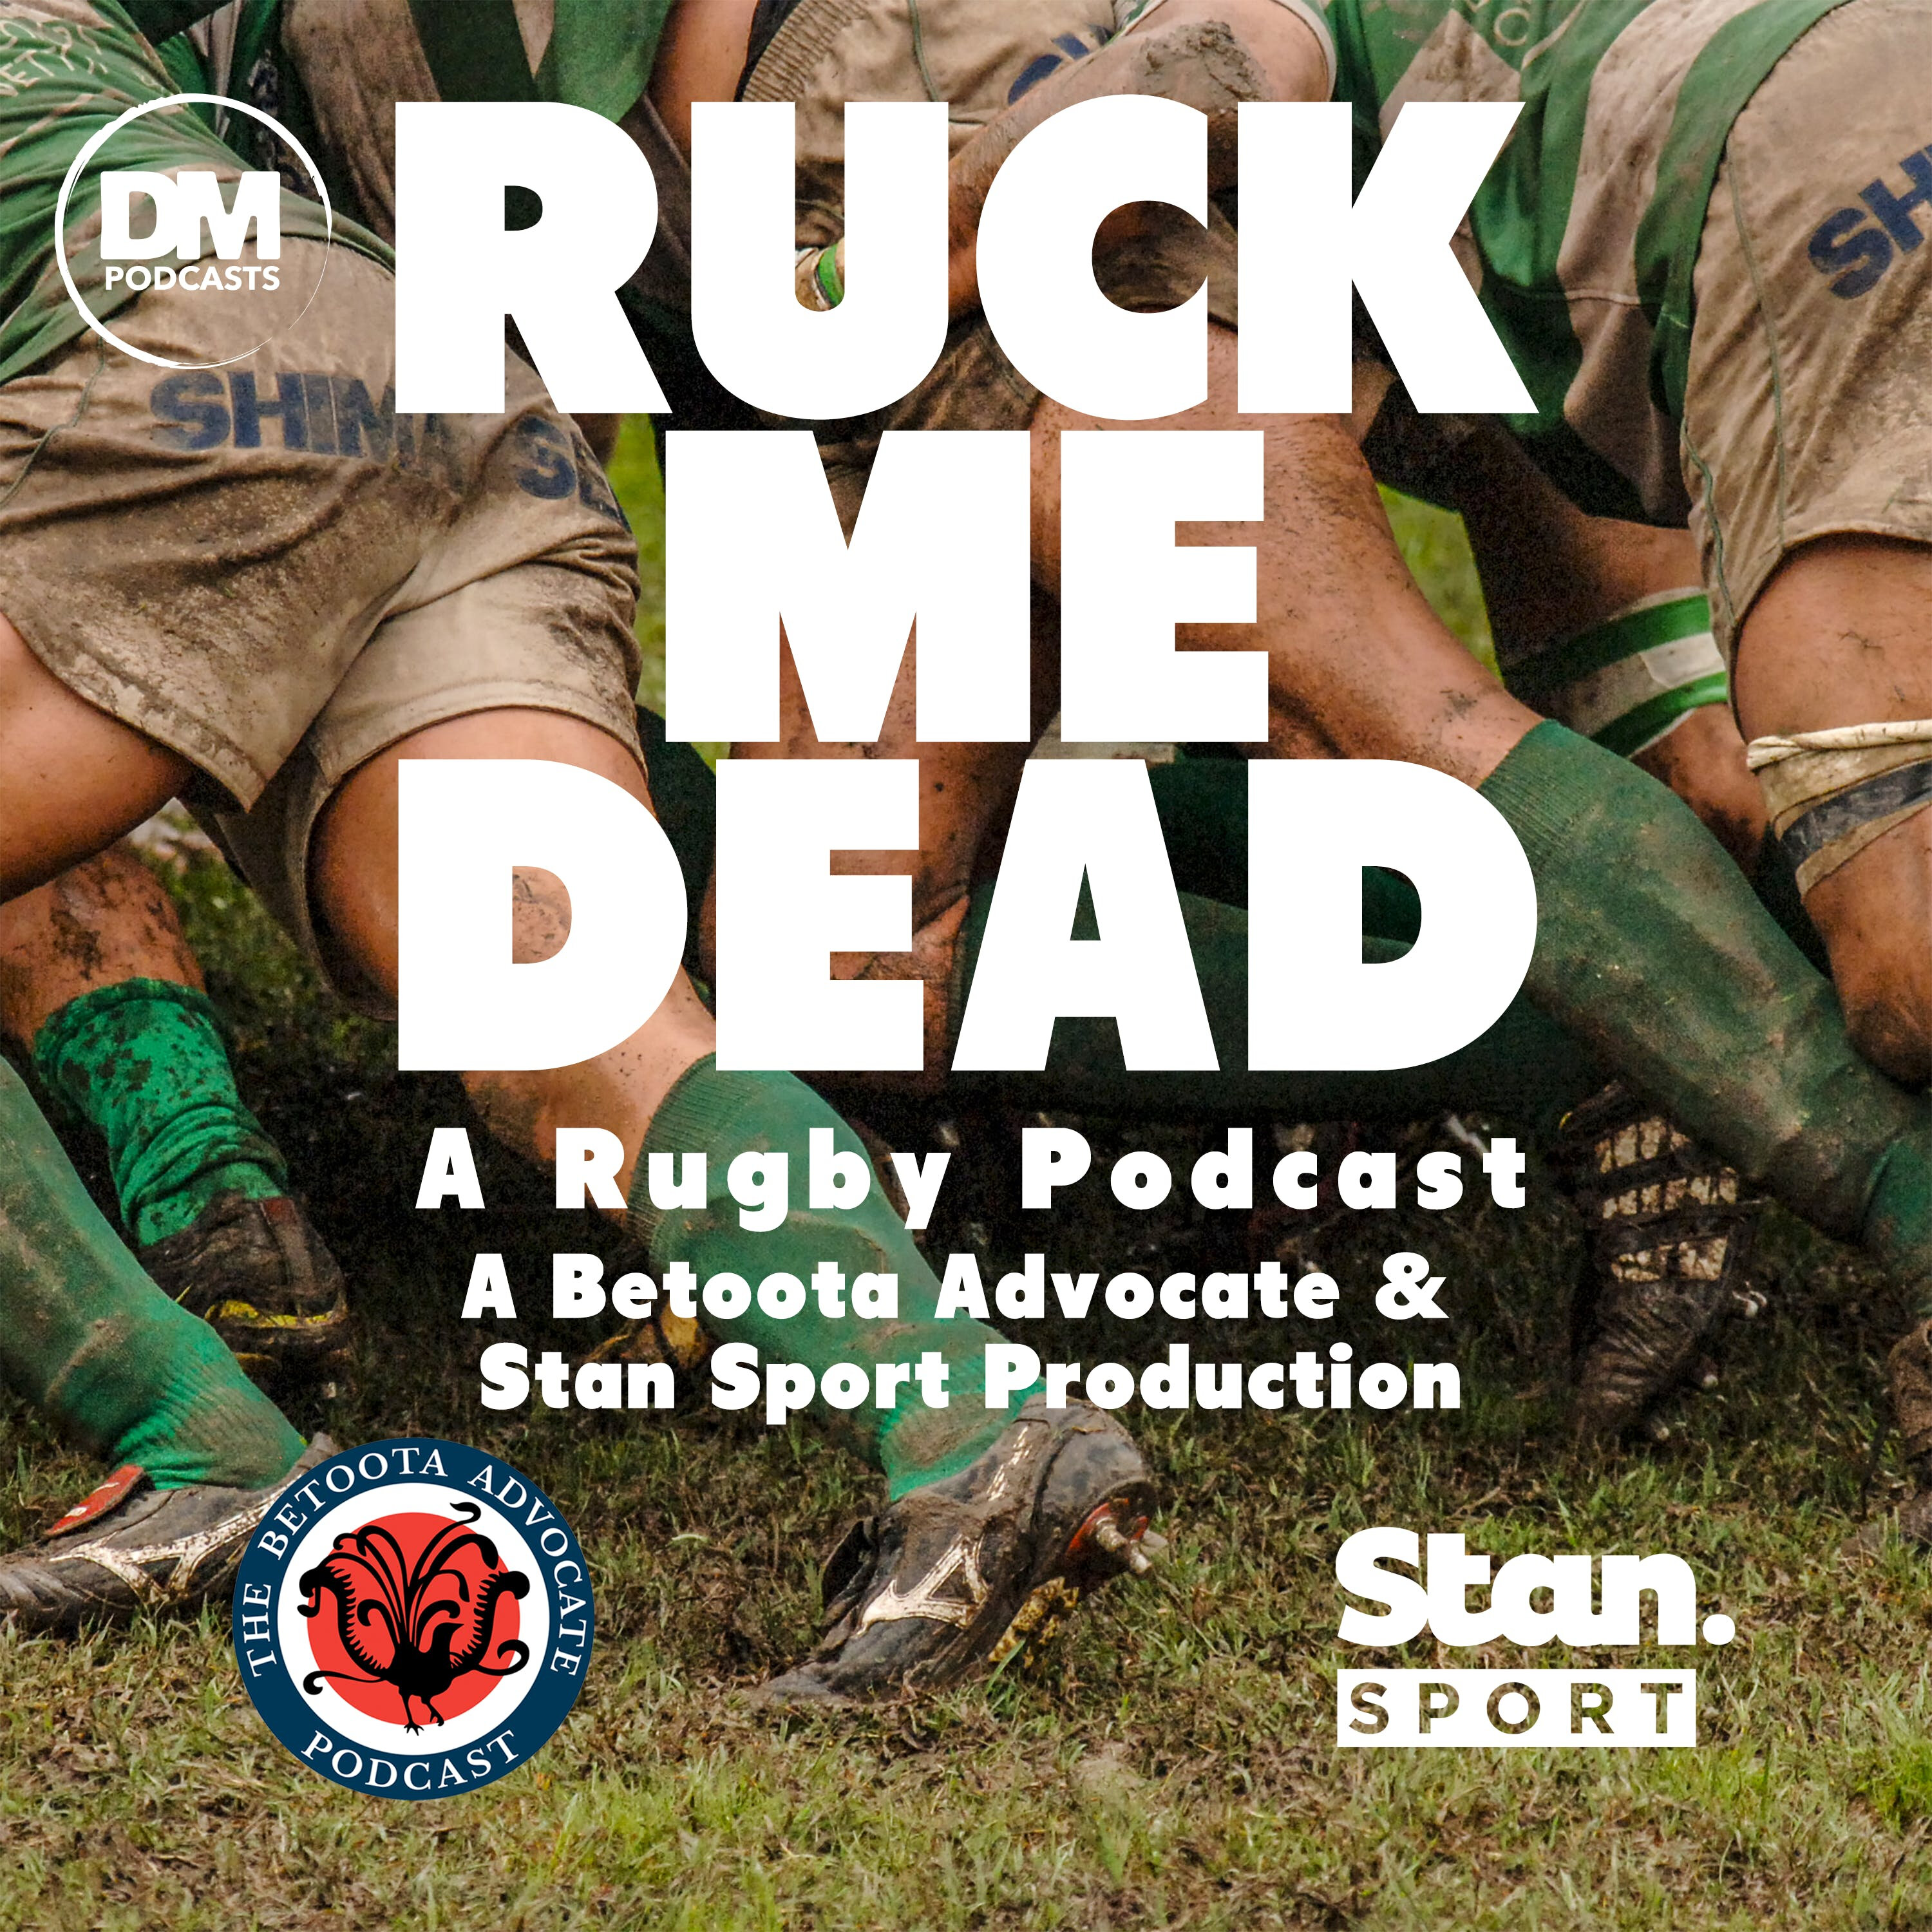 The Red Hot Bush Capital Boys, The Woeful Waratahs & All The Other Rugby Chat Getting Around